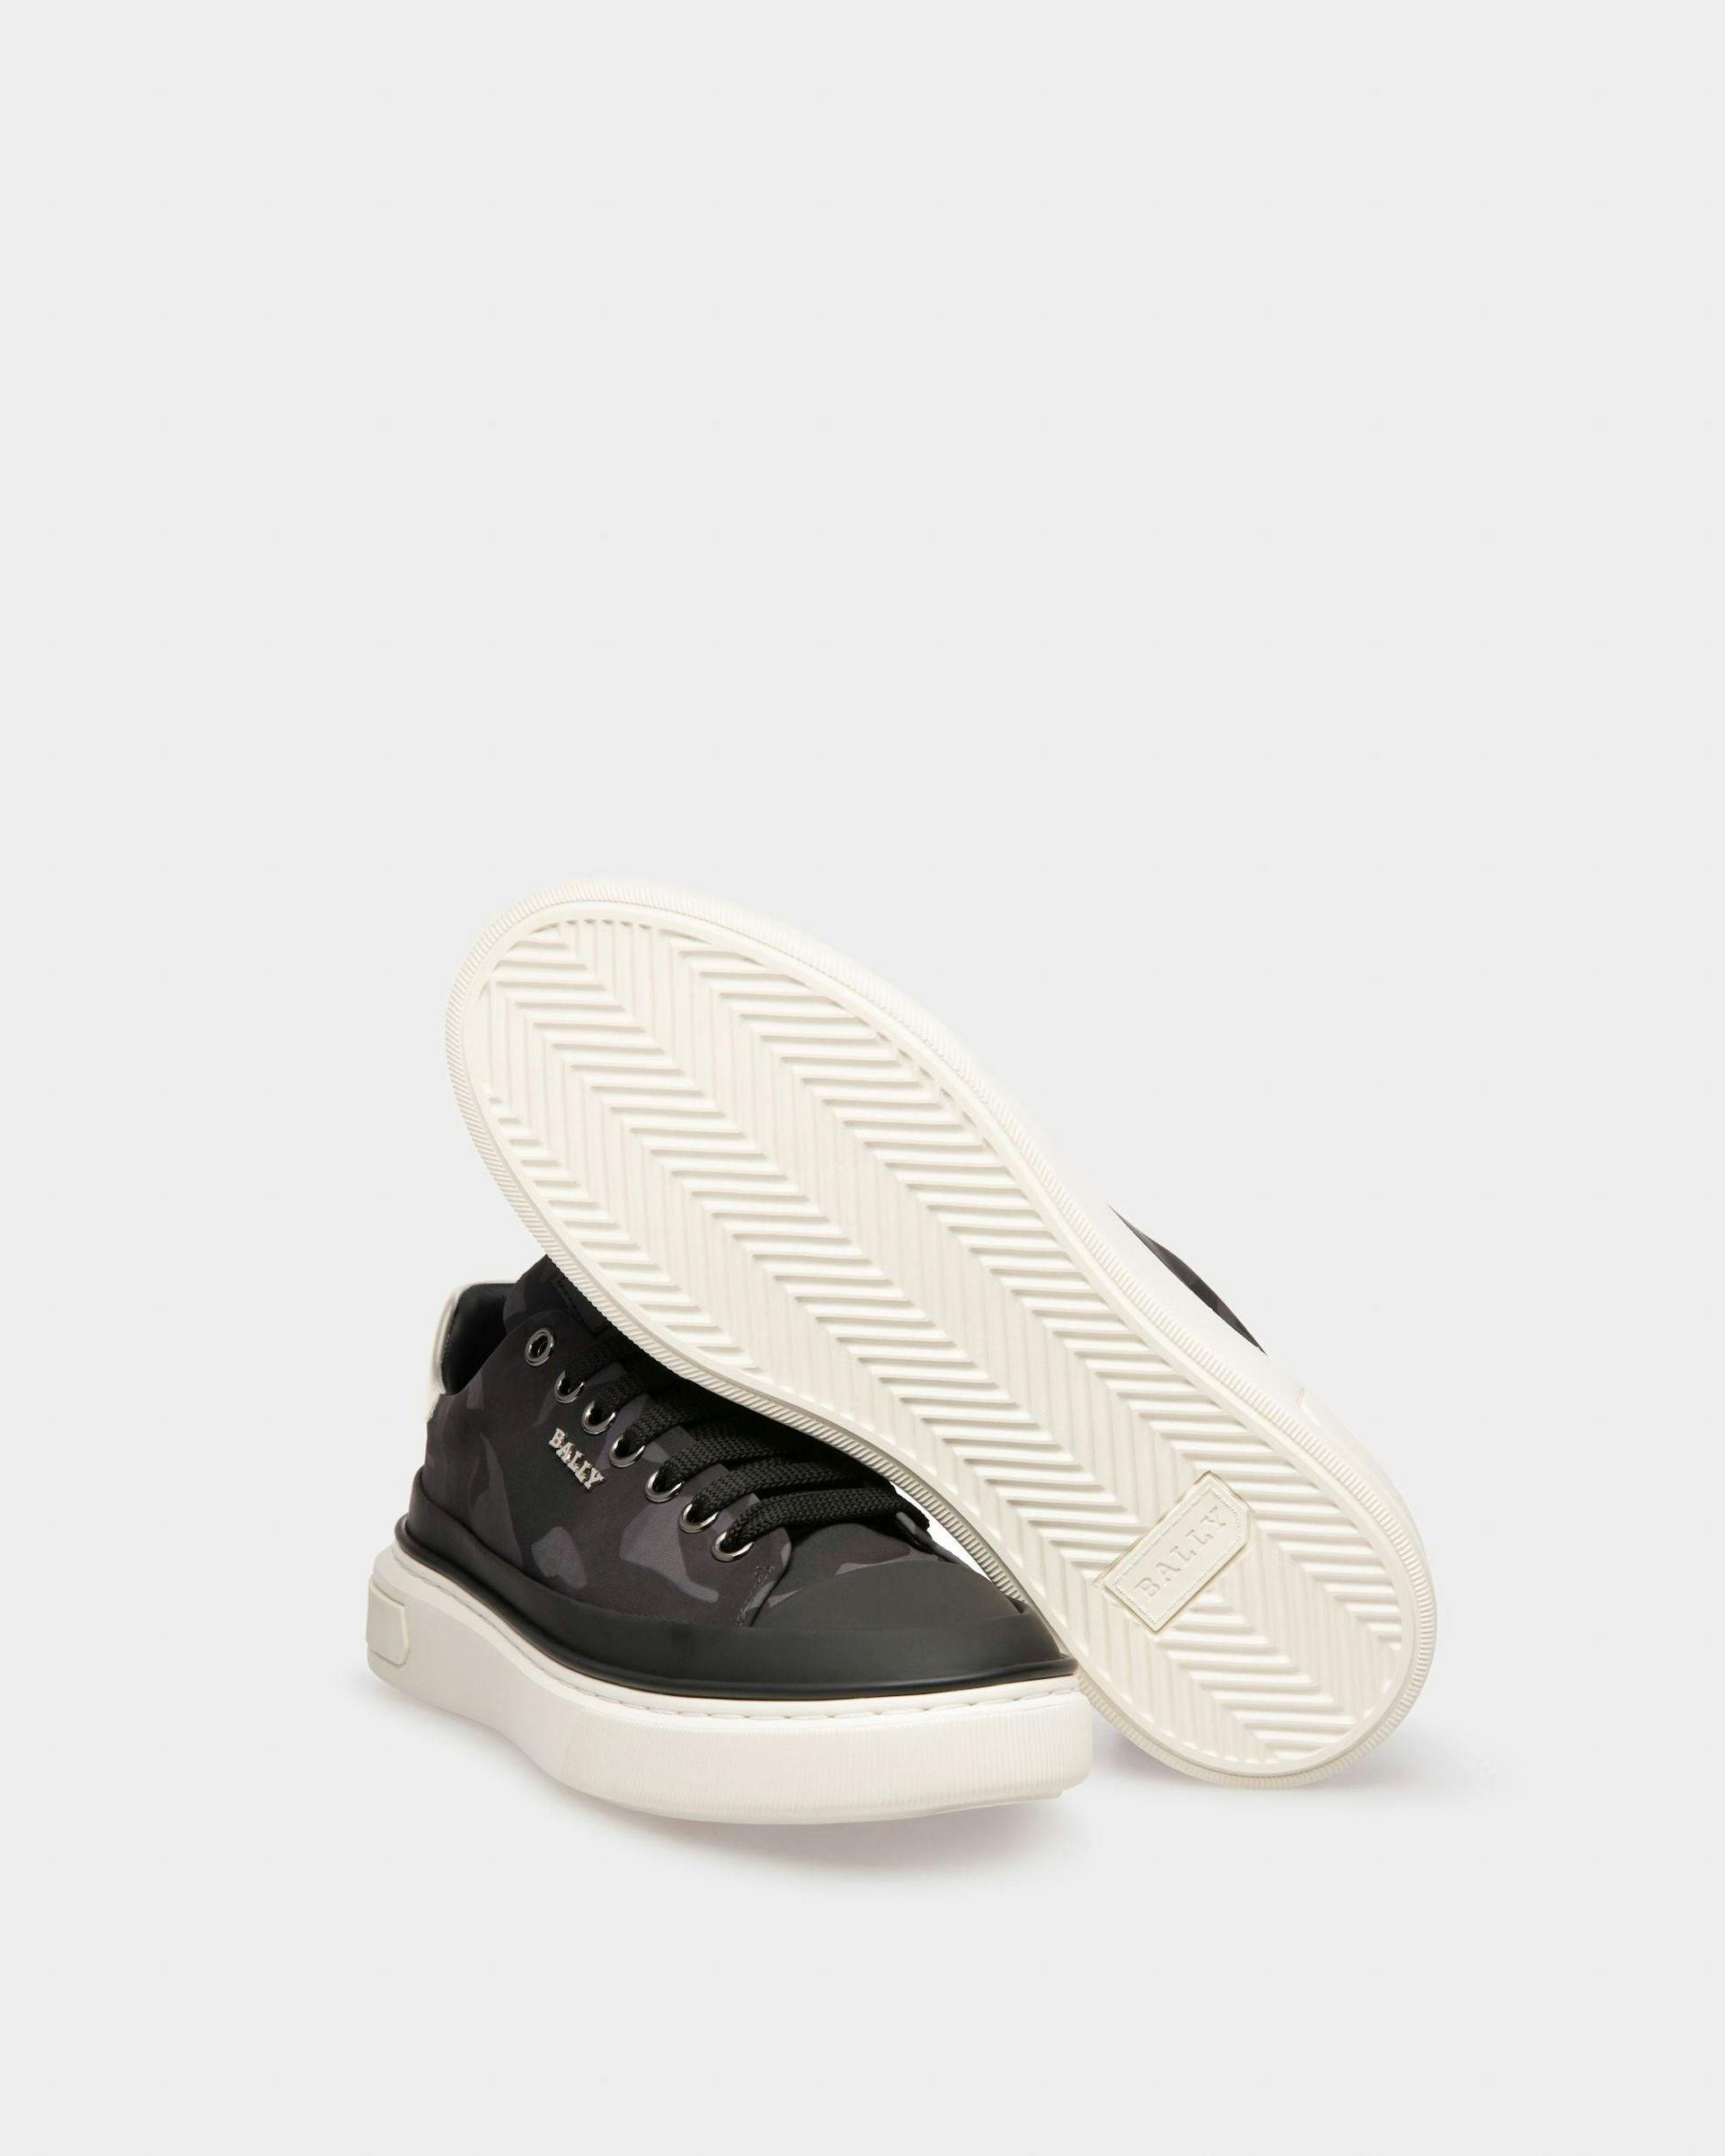 Maily Recycled Polyester And Leather Sneakers In Black - Women's - Bally - 05